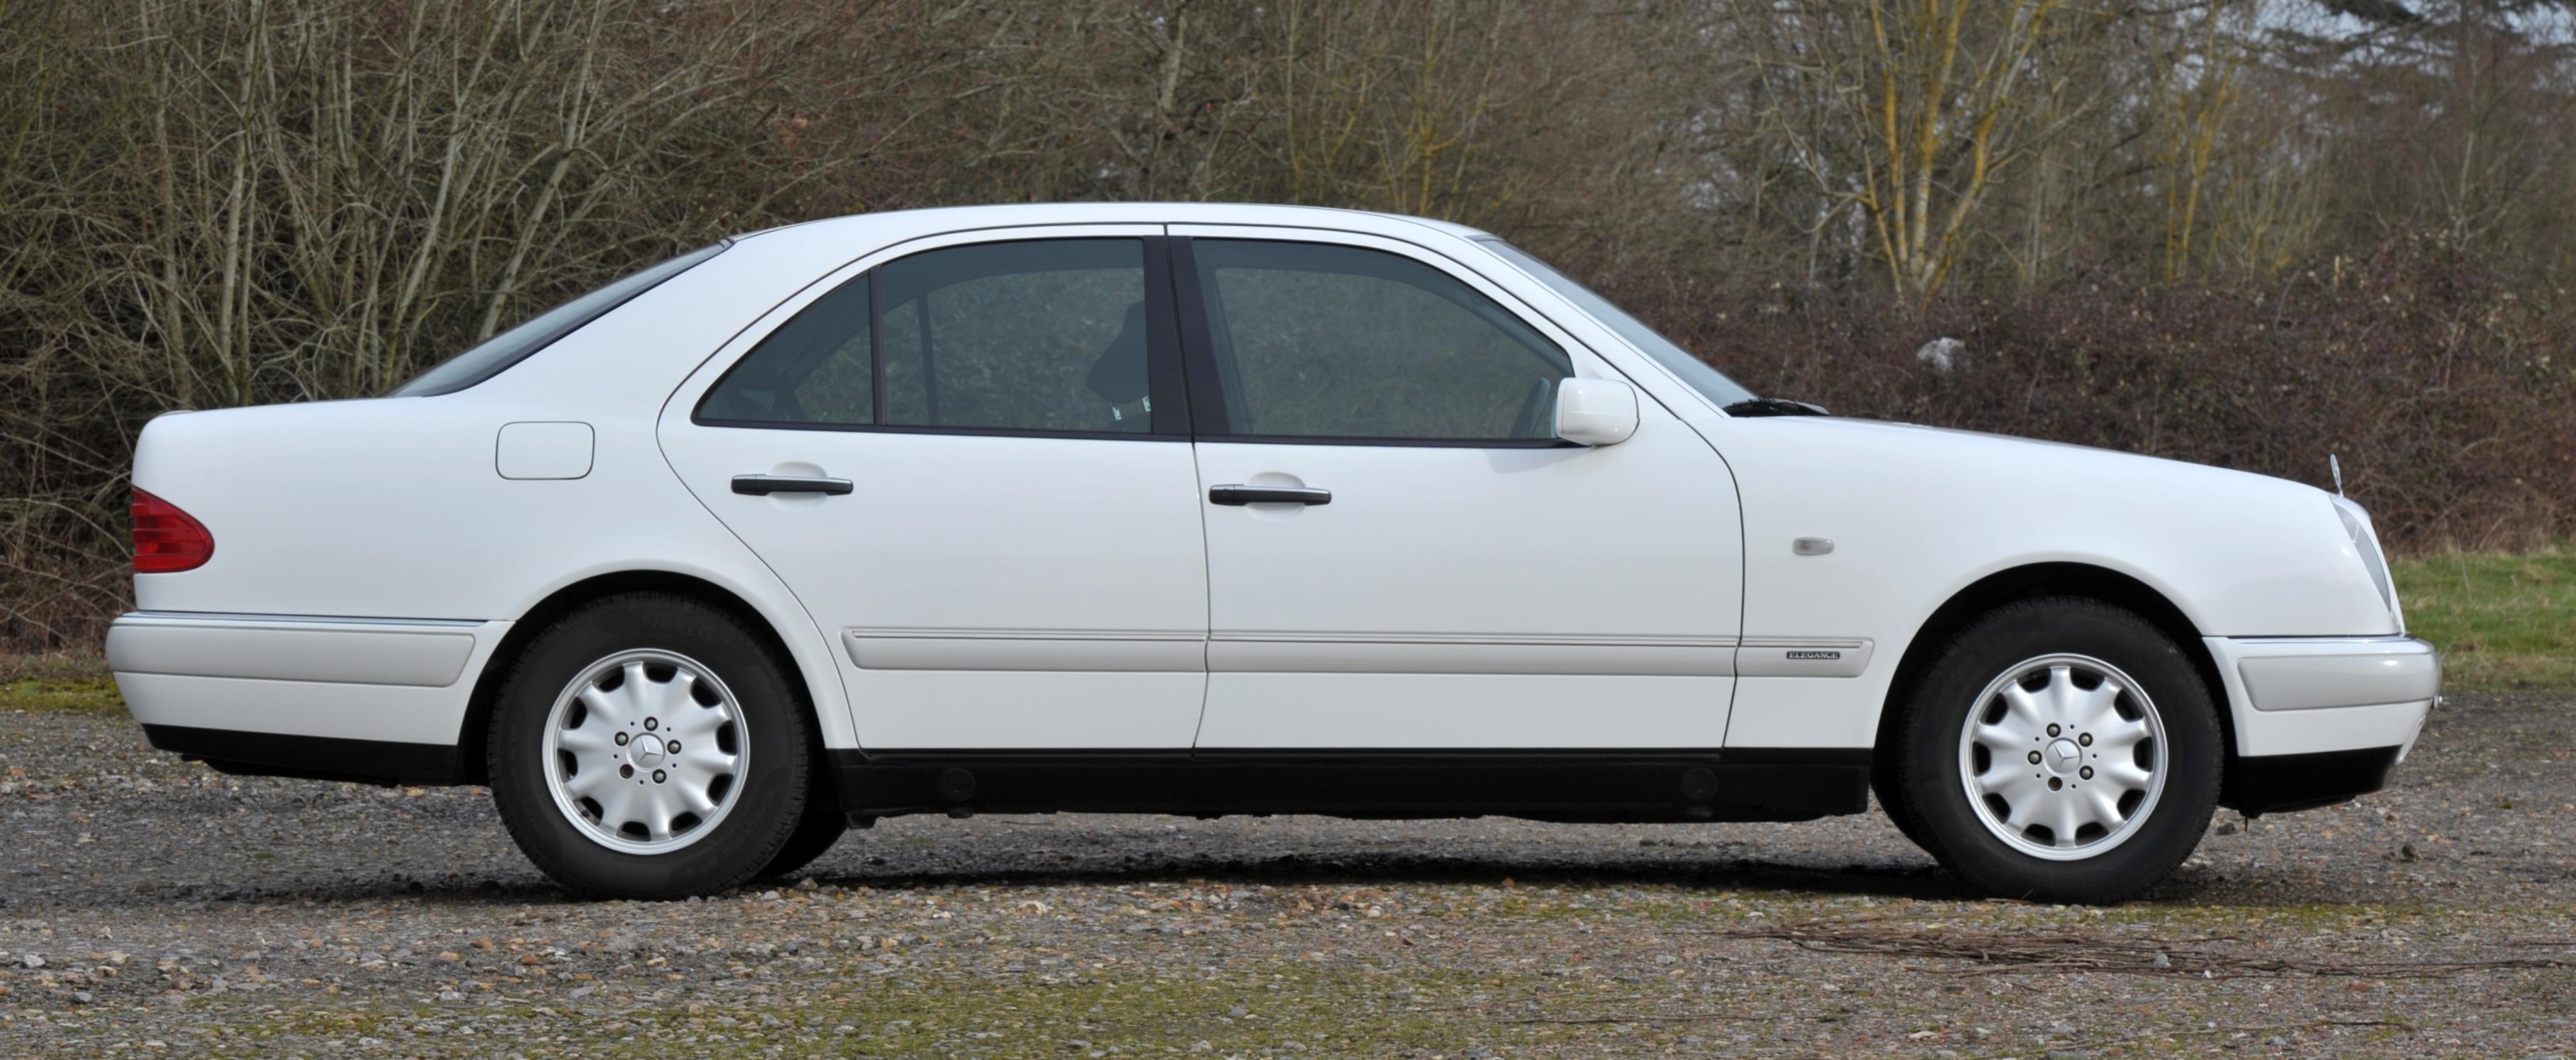 1998 Mercedes Benz E240 Elegance Saloon Petrol Automatic. Registration: S260 DHC. Mileage: 133, - Image 3 of 16